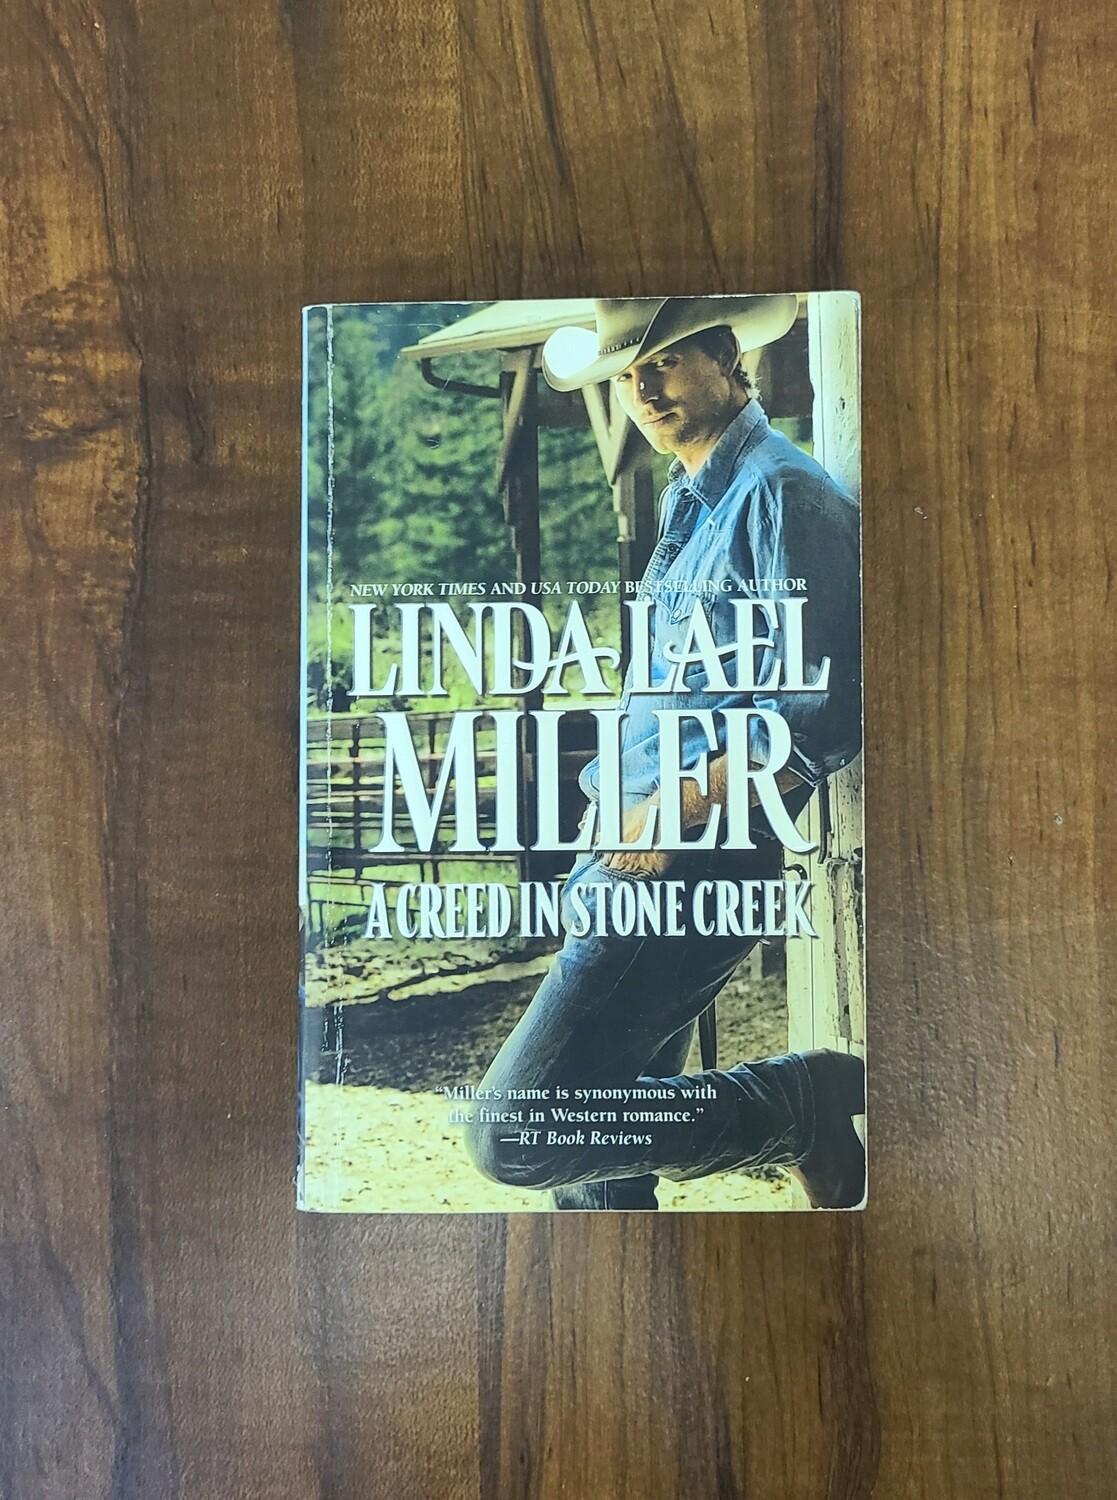 A Creed in Stone Creek by Linda Lael Miller